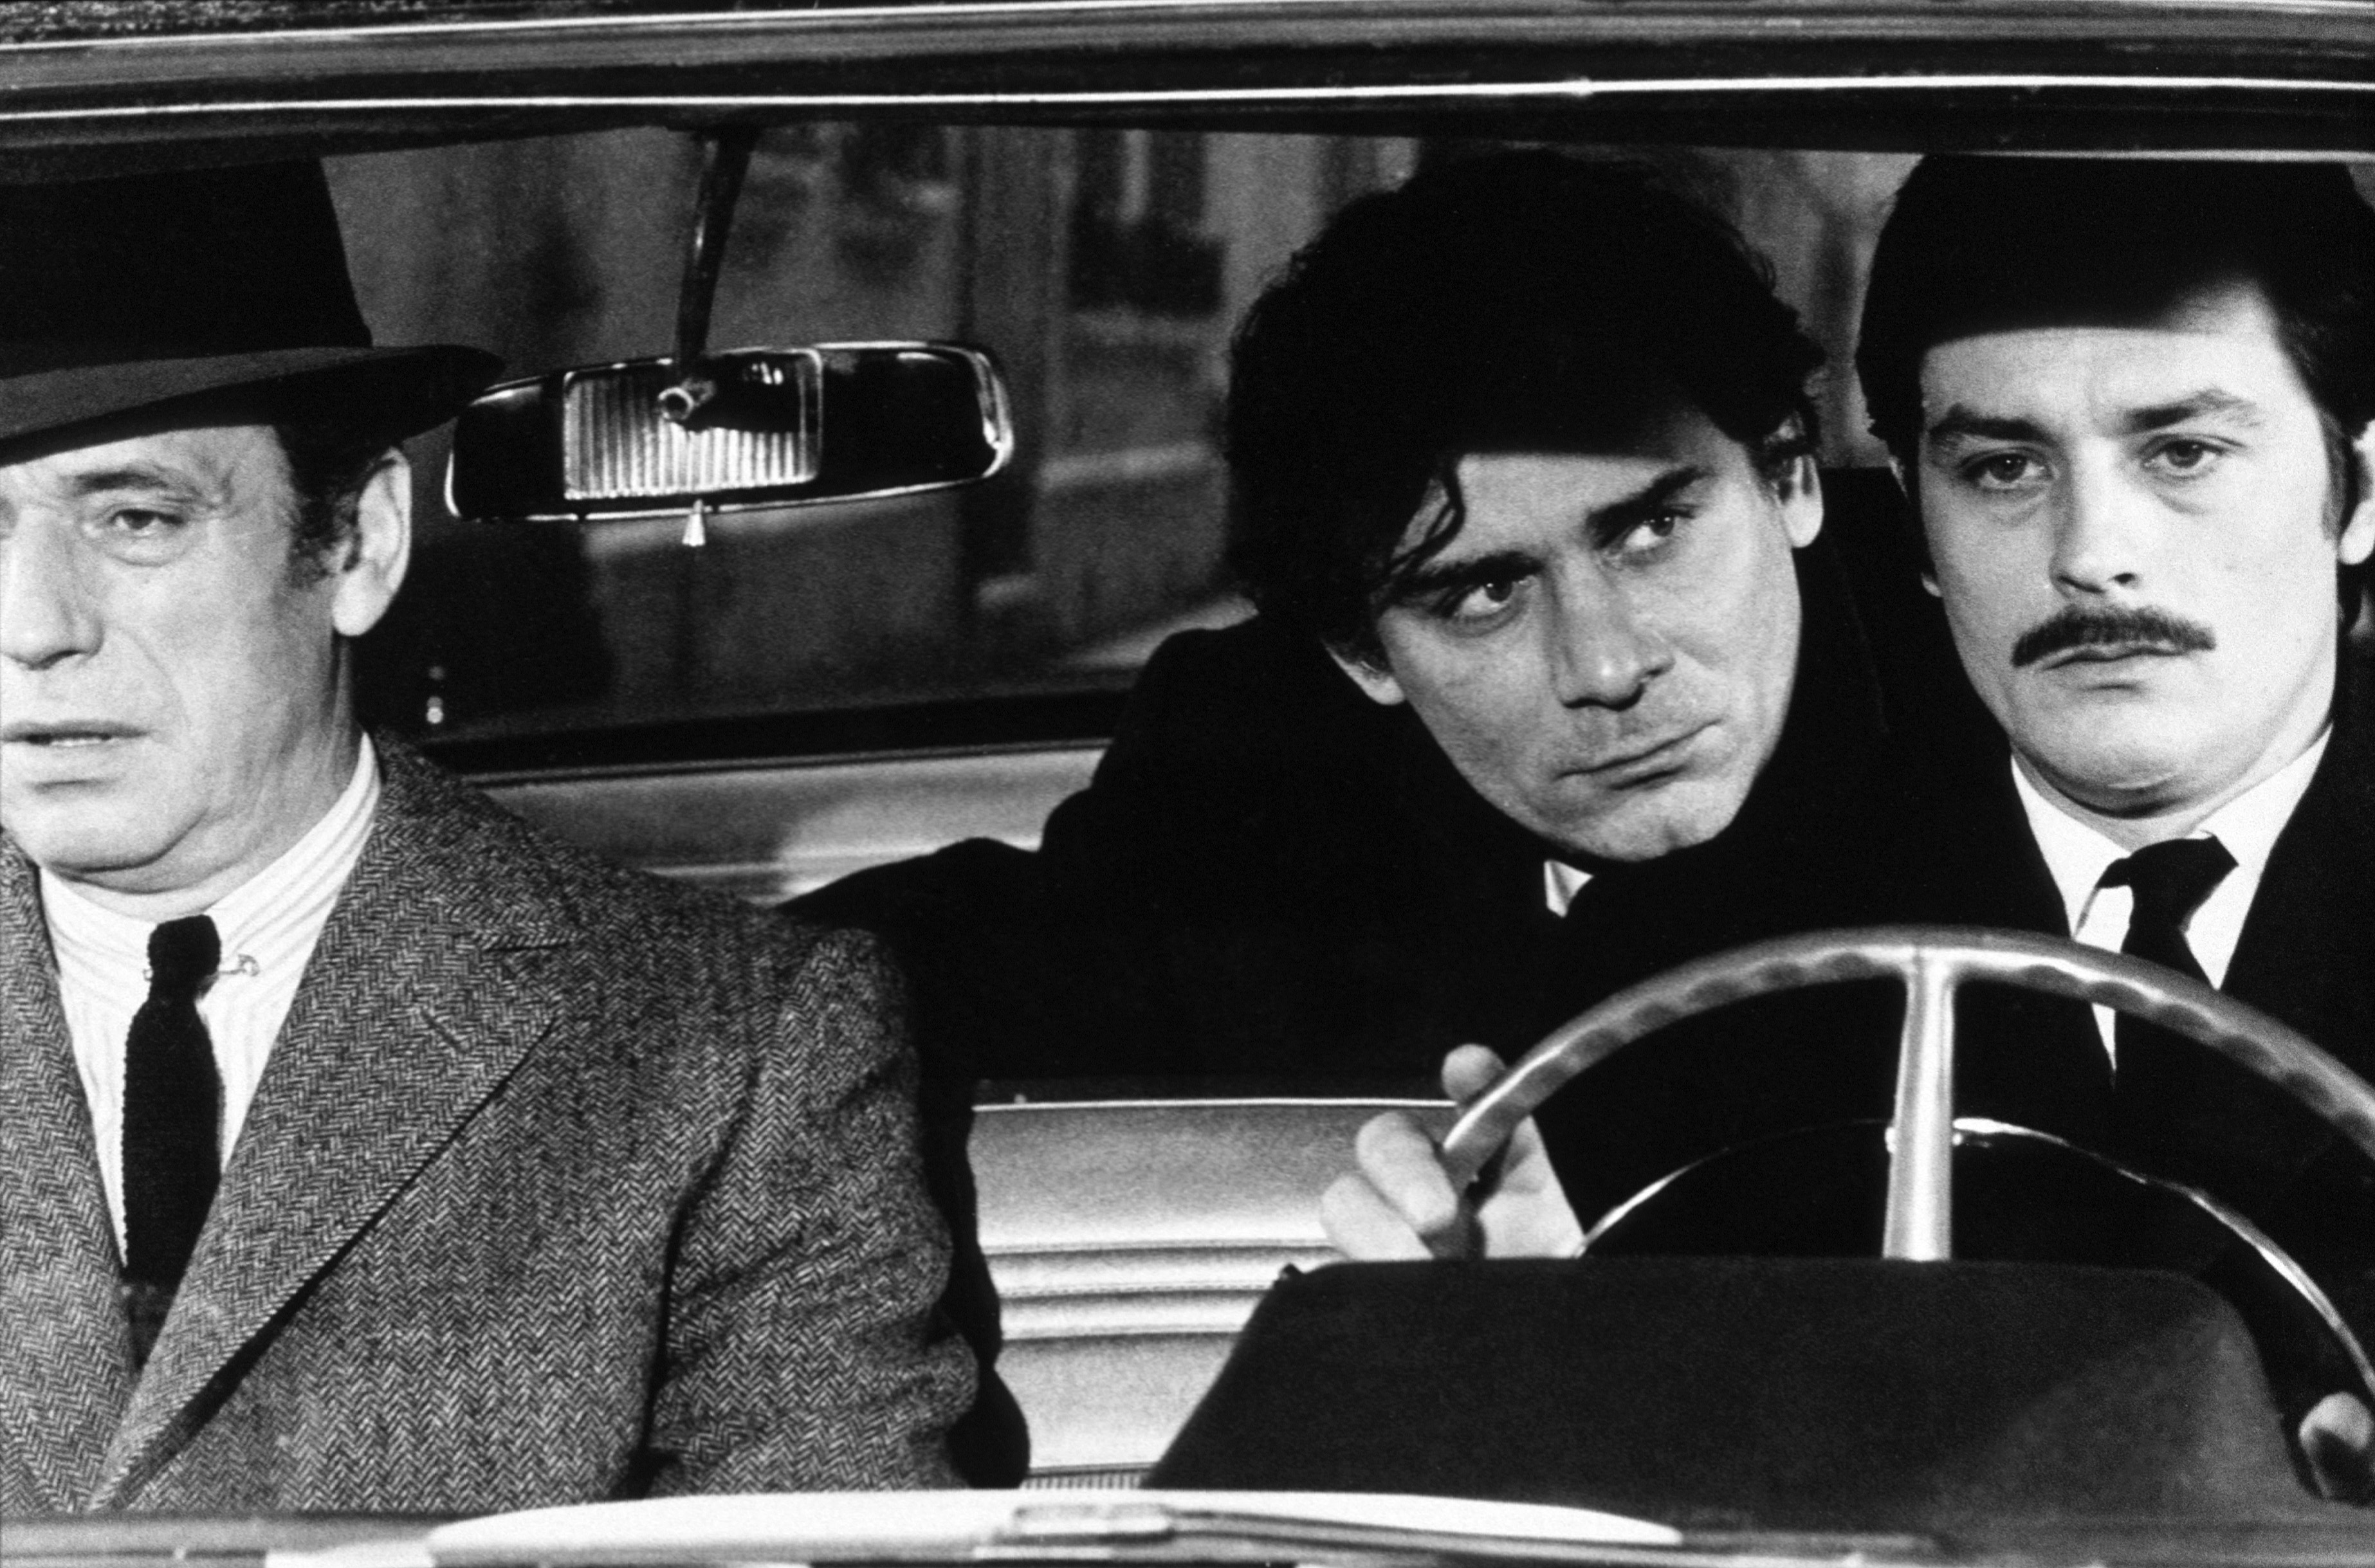 Still of Alain Delon, Gian Maria Volonté and Yves Montand in Le cercle rouge (1970)